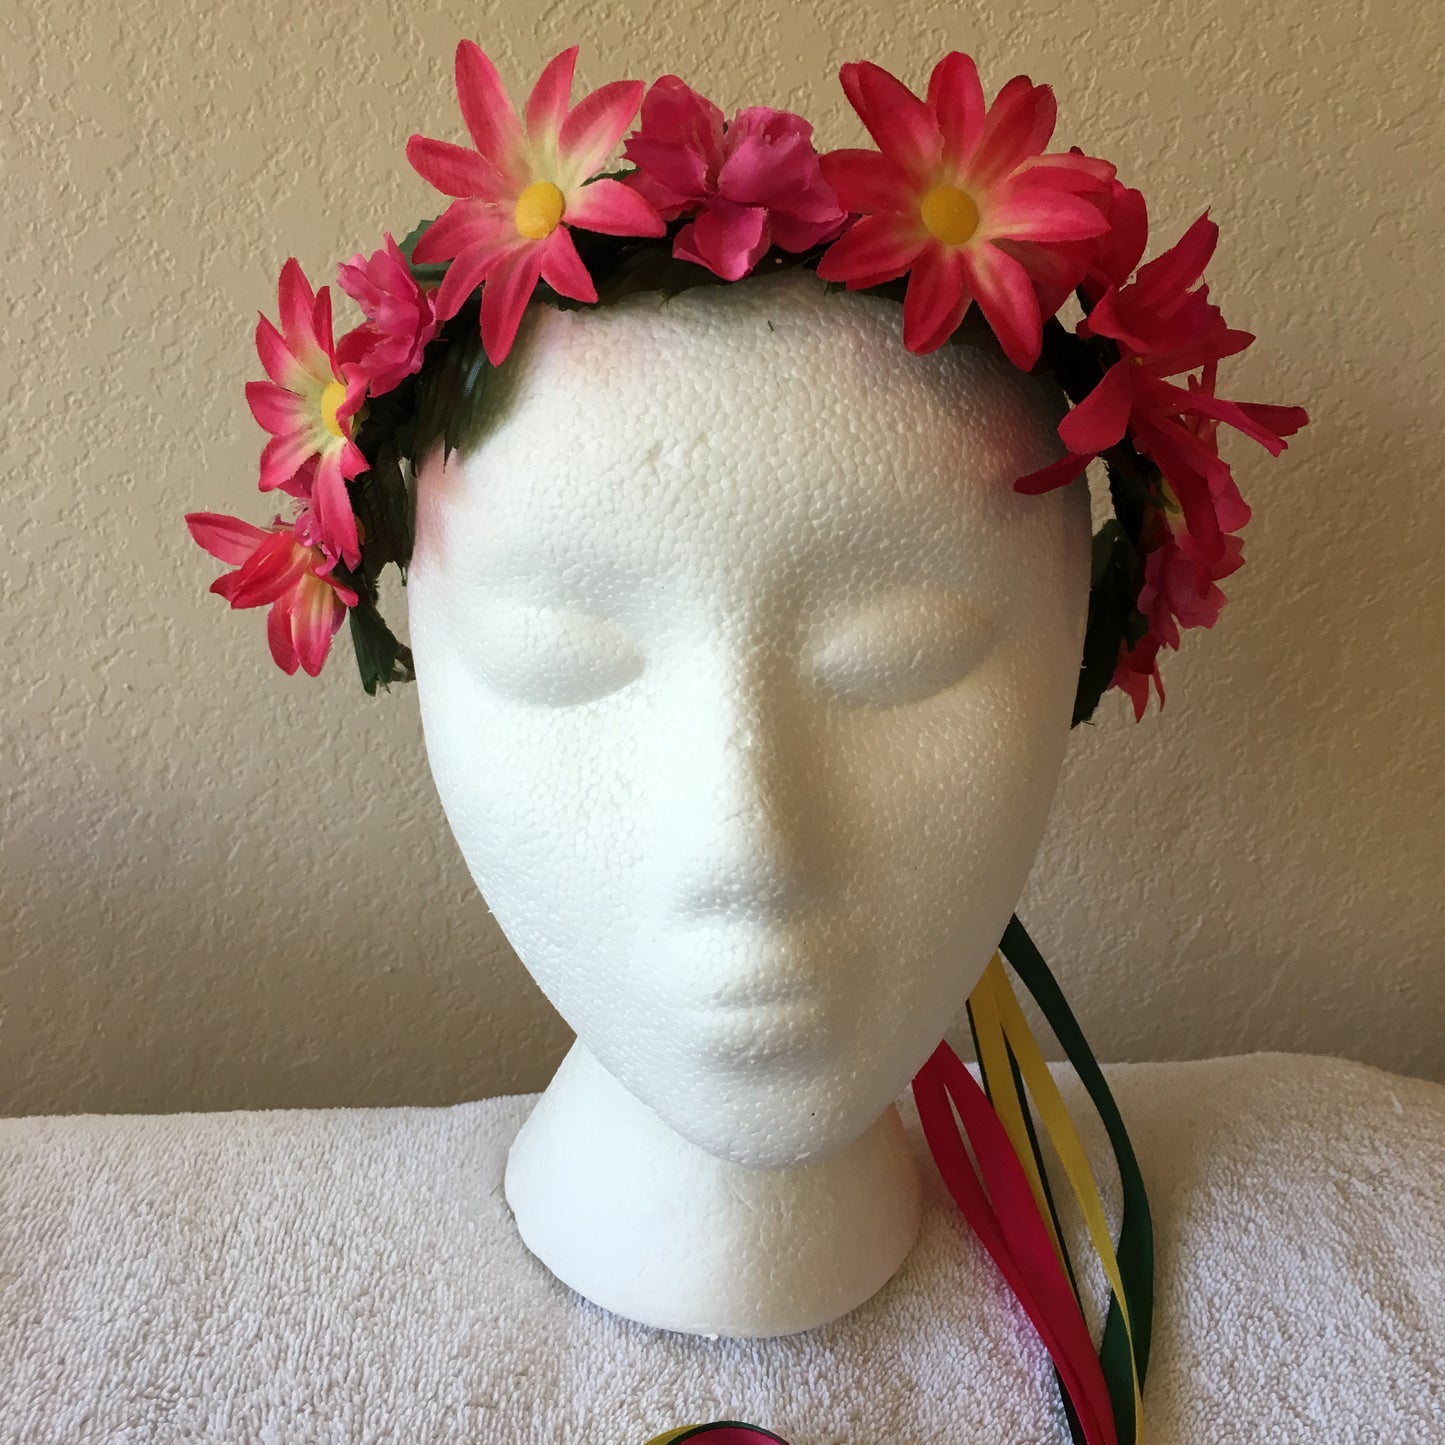 Small Wreath - Pink & yellow daisies